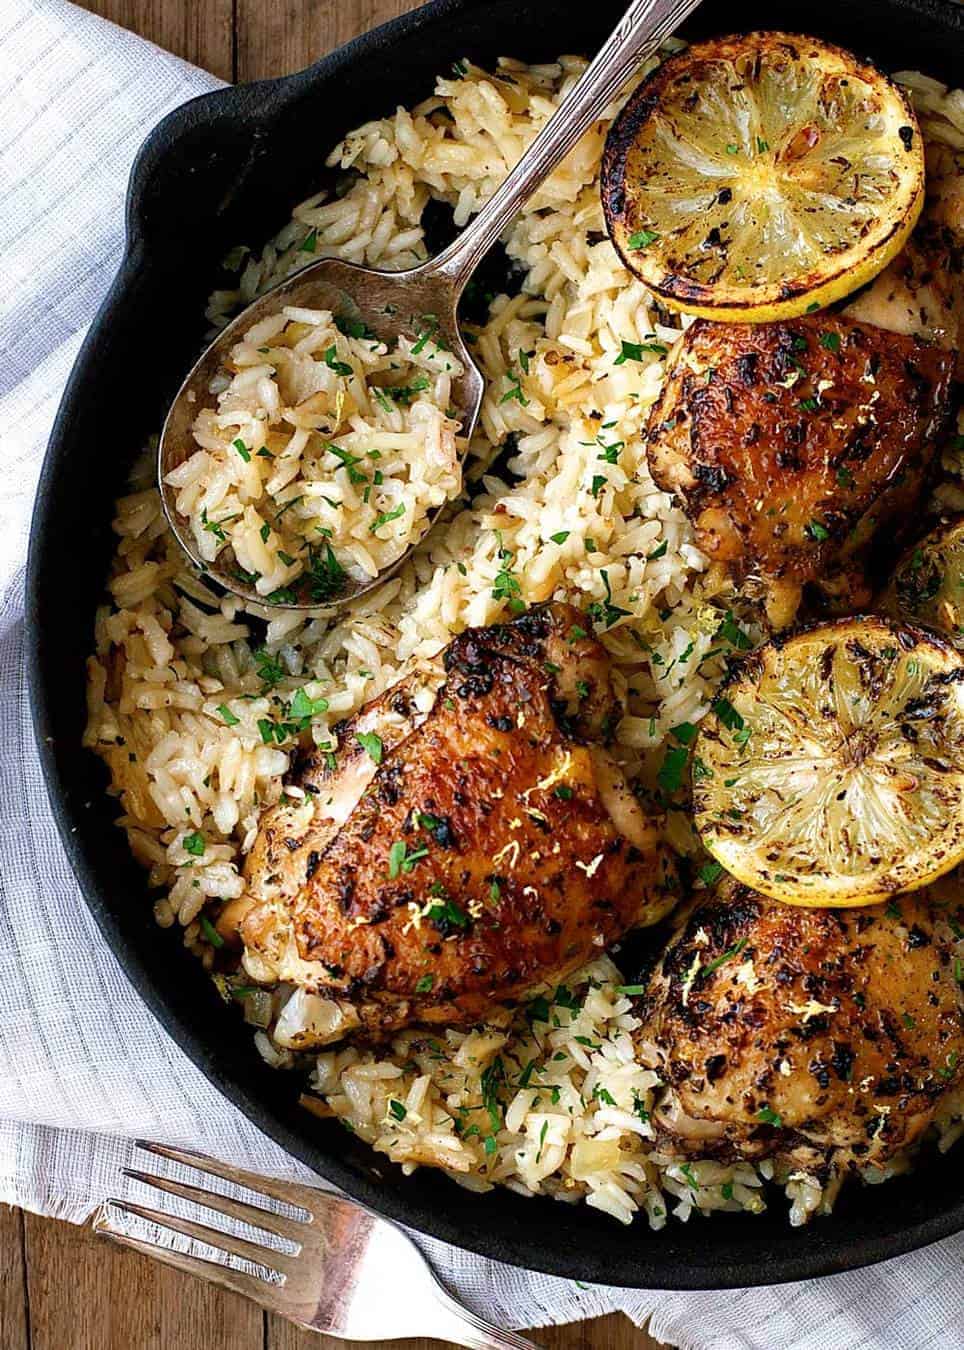 This Greek Chicken Recipe is made with an incredible lemon rice which is all made in ONE POT! www.recipetineats.com